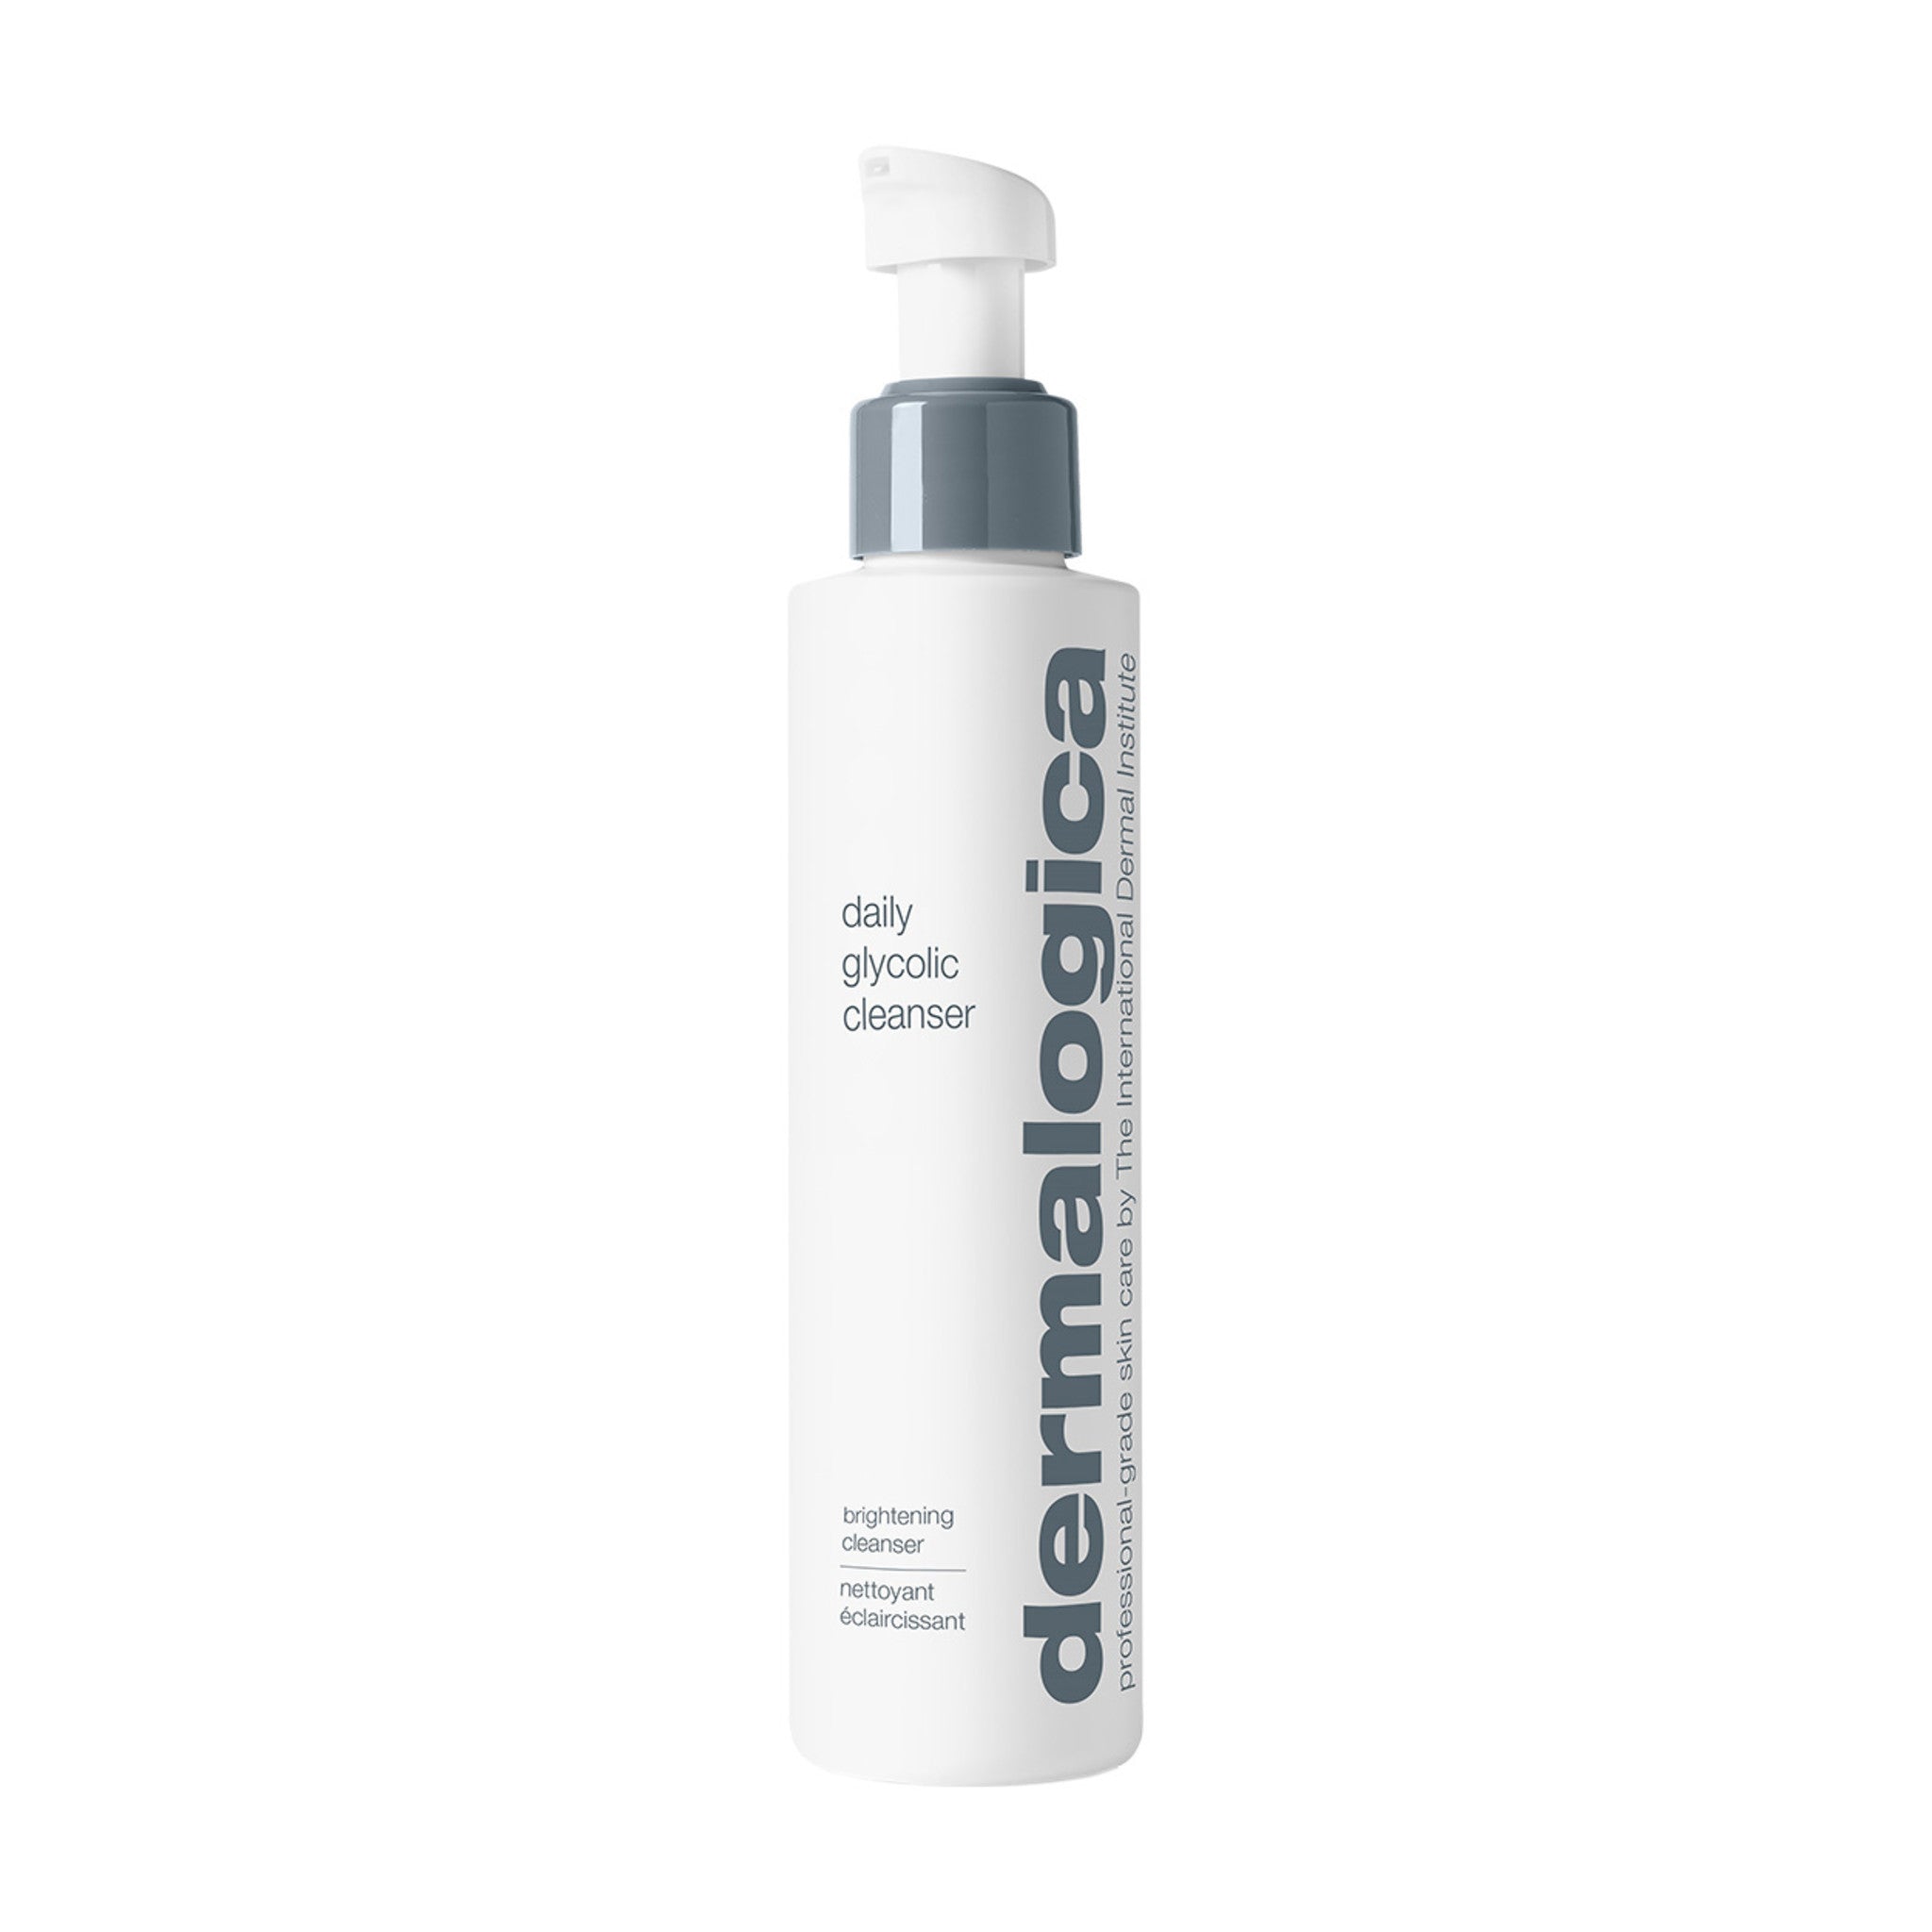 Dermalogica Daily Glycolic Cleanser main image.